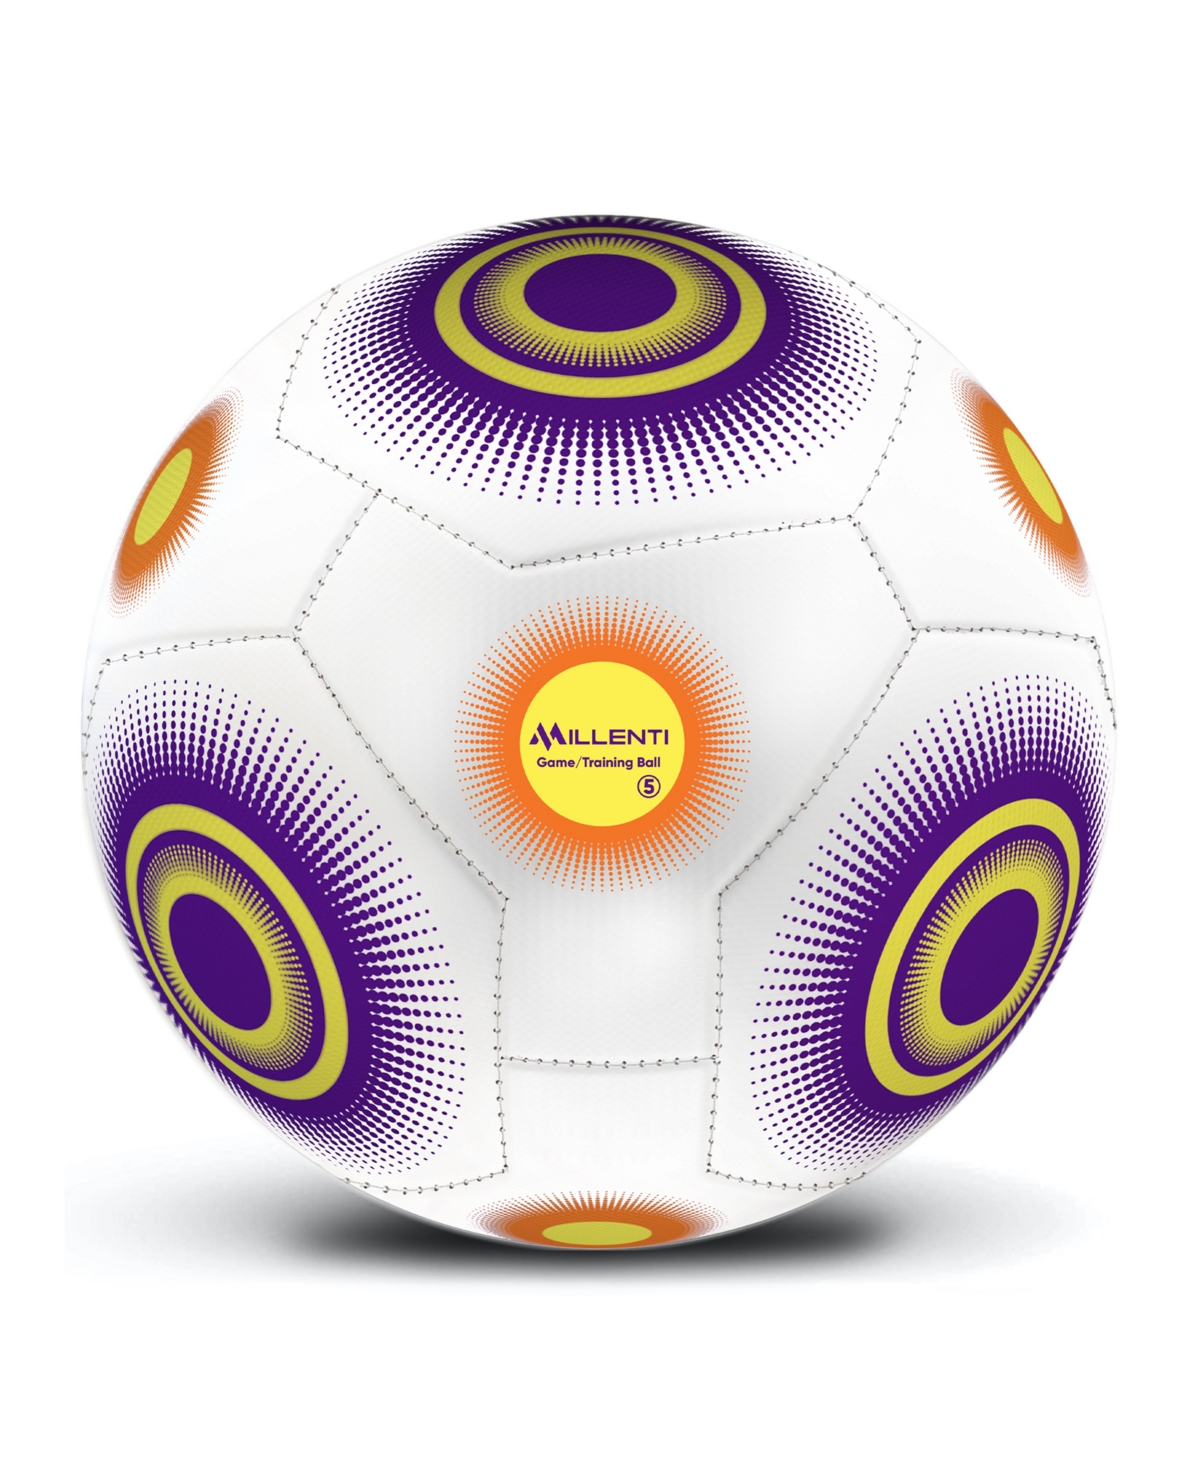 Millenti Us Soccer Ball Official Size 5 - Knuckle-it Pro With High-visibility Easy-to-track Design Thermal Fu In White/purple/orange/yellow